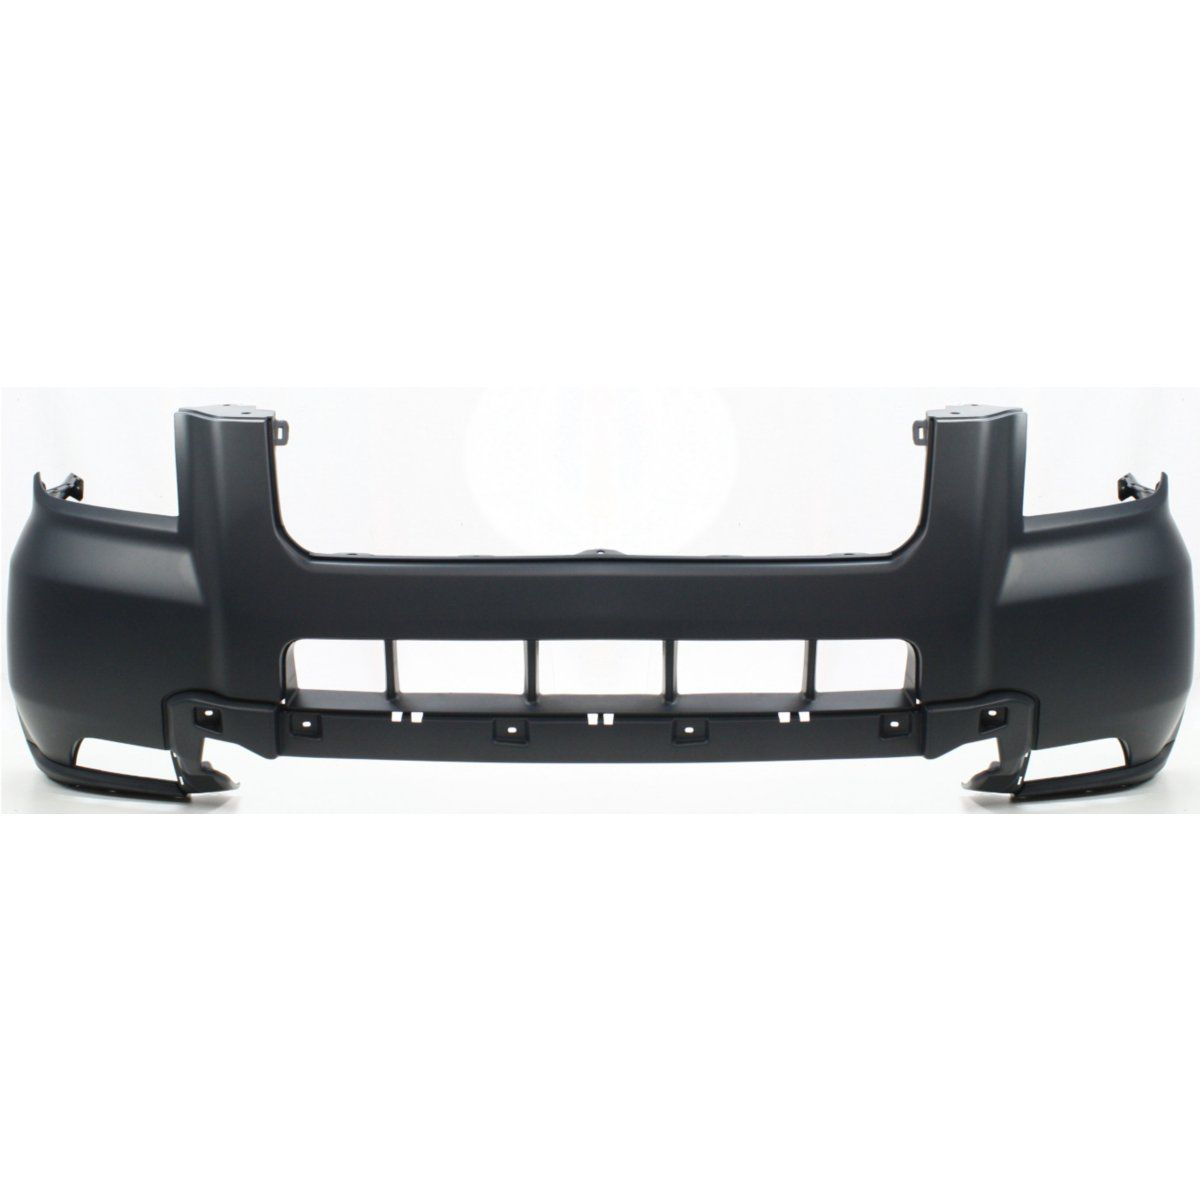 2006-2008 HONDA PILOT Front Bumper Cover Painted to Match